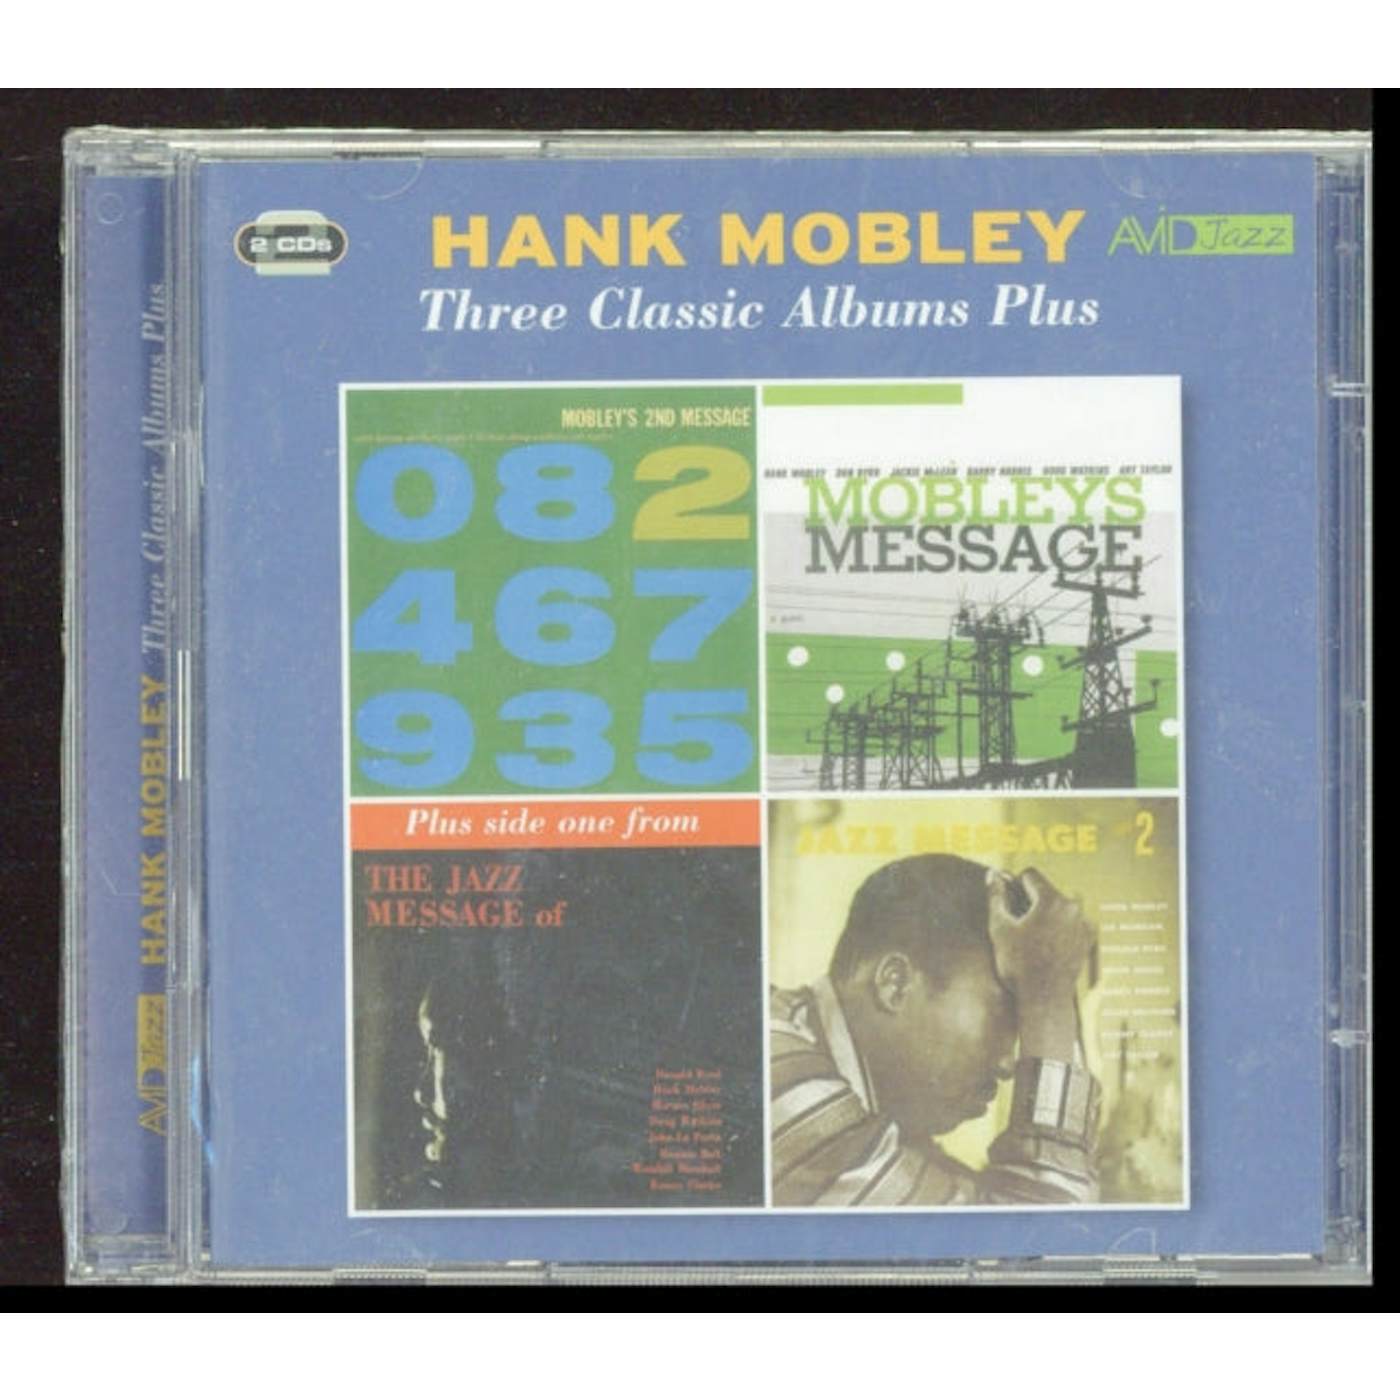 Hank Mobley CD - Three Classic Albums Plus (Mobley's Message / 2nd Message / Jazz Message No. 2)